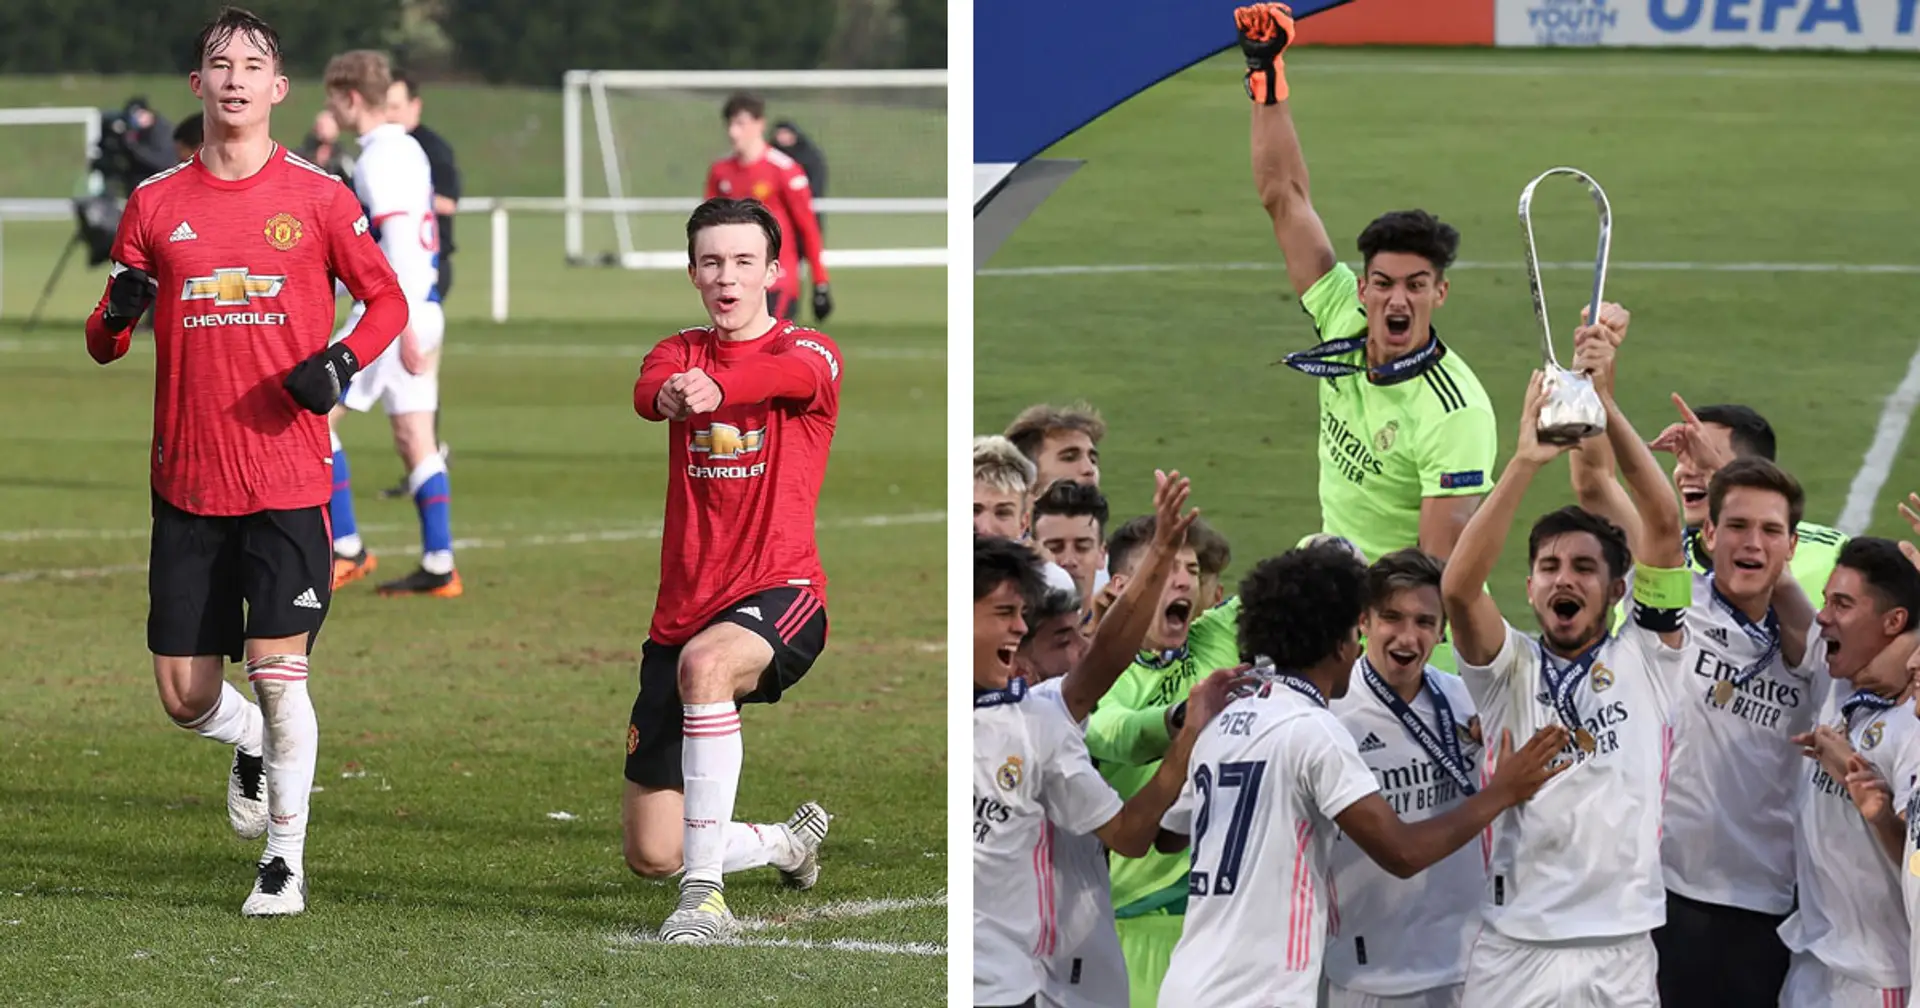 United set to face defending champions Real Madrid in UEFA Youth Cup – and fans can’t believe it